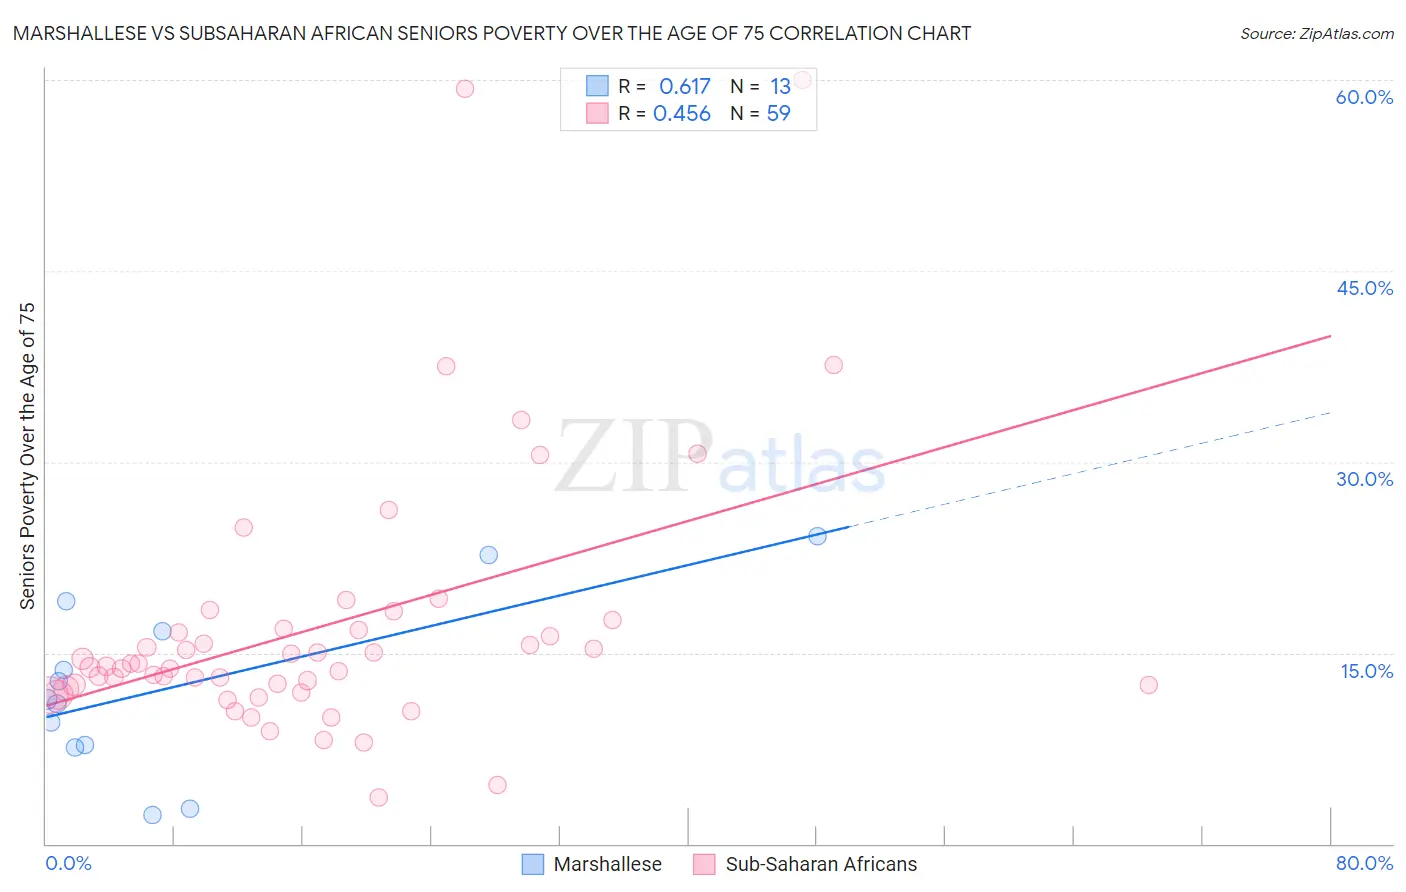 Marshallese vs Subsaharan African Seniors Poverty Over the Age of 75